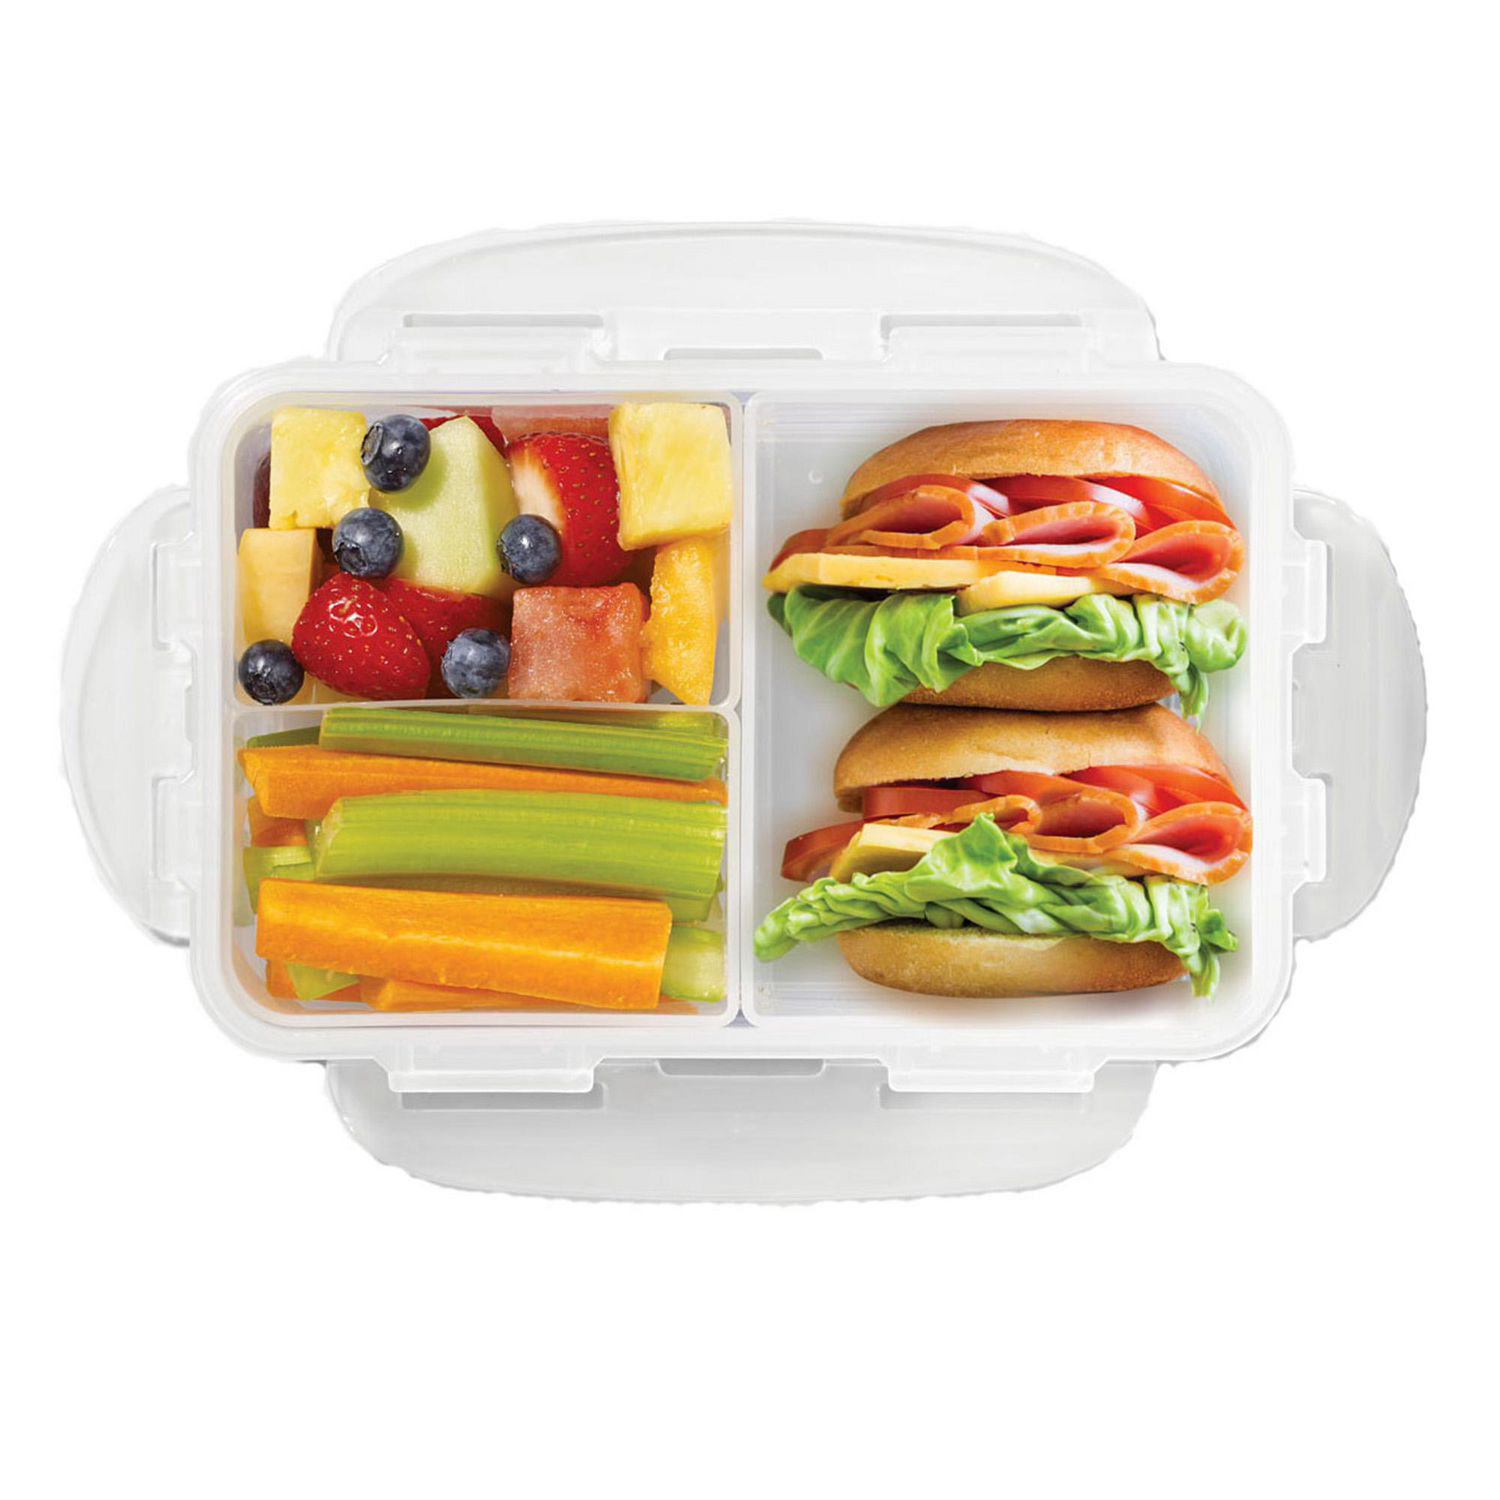 Starfrit LocknLock Lunch 34 oz / 1 L Rectangular Container with Divider,  Nestable and stackable 